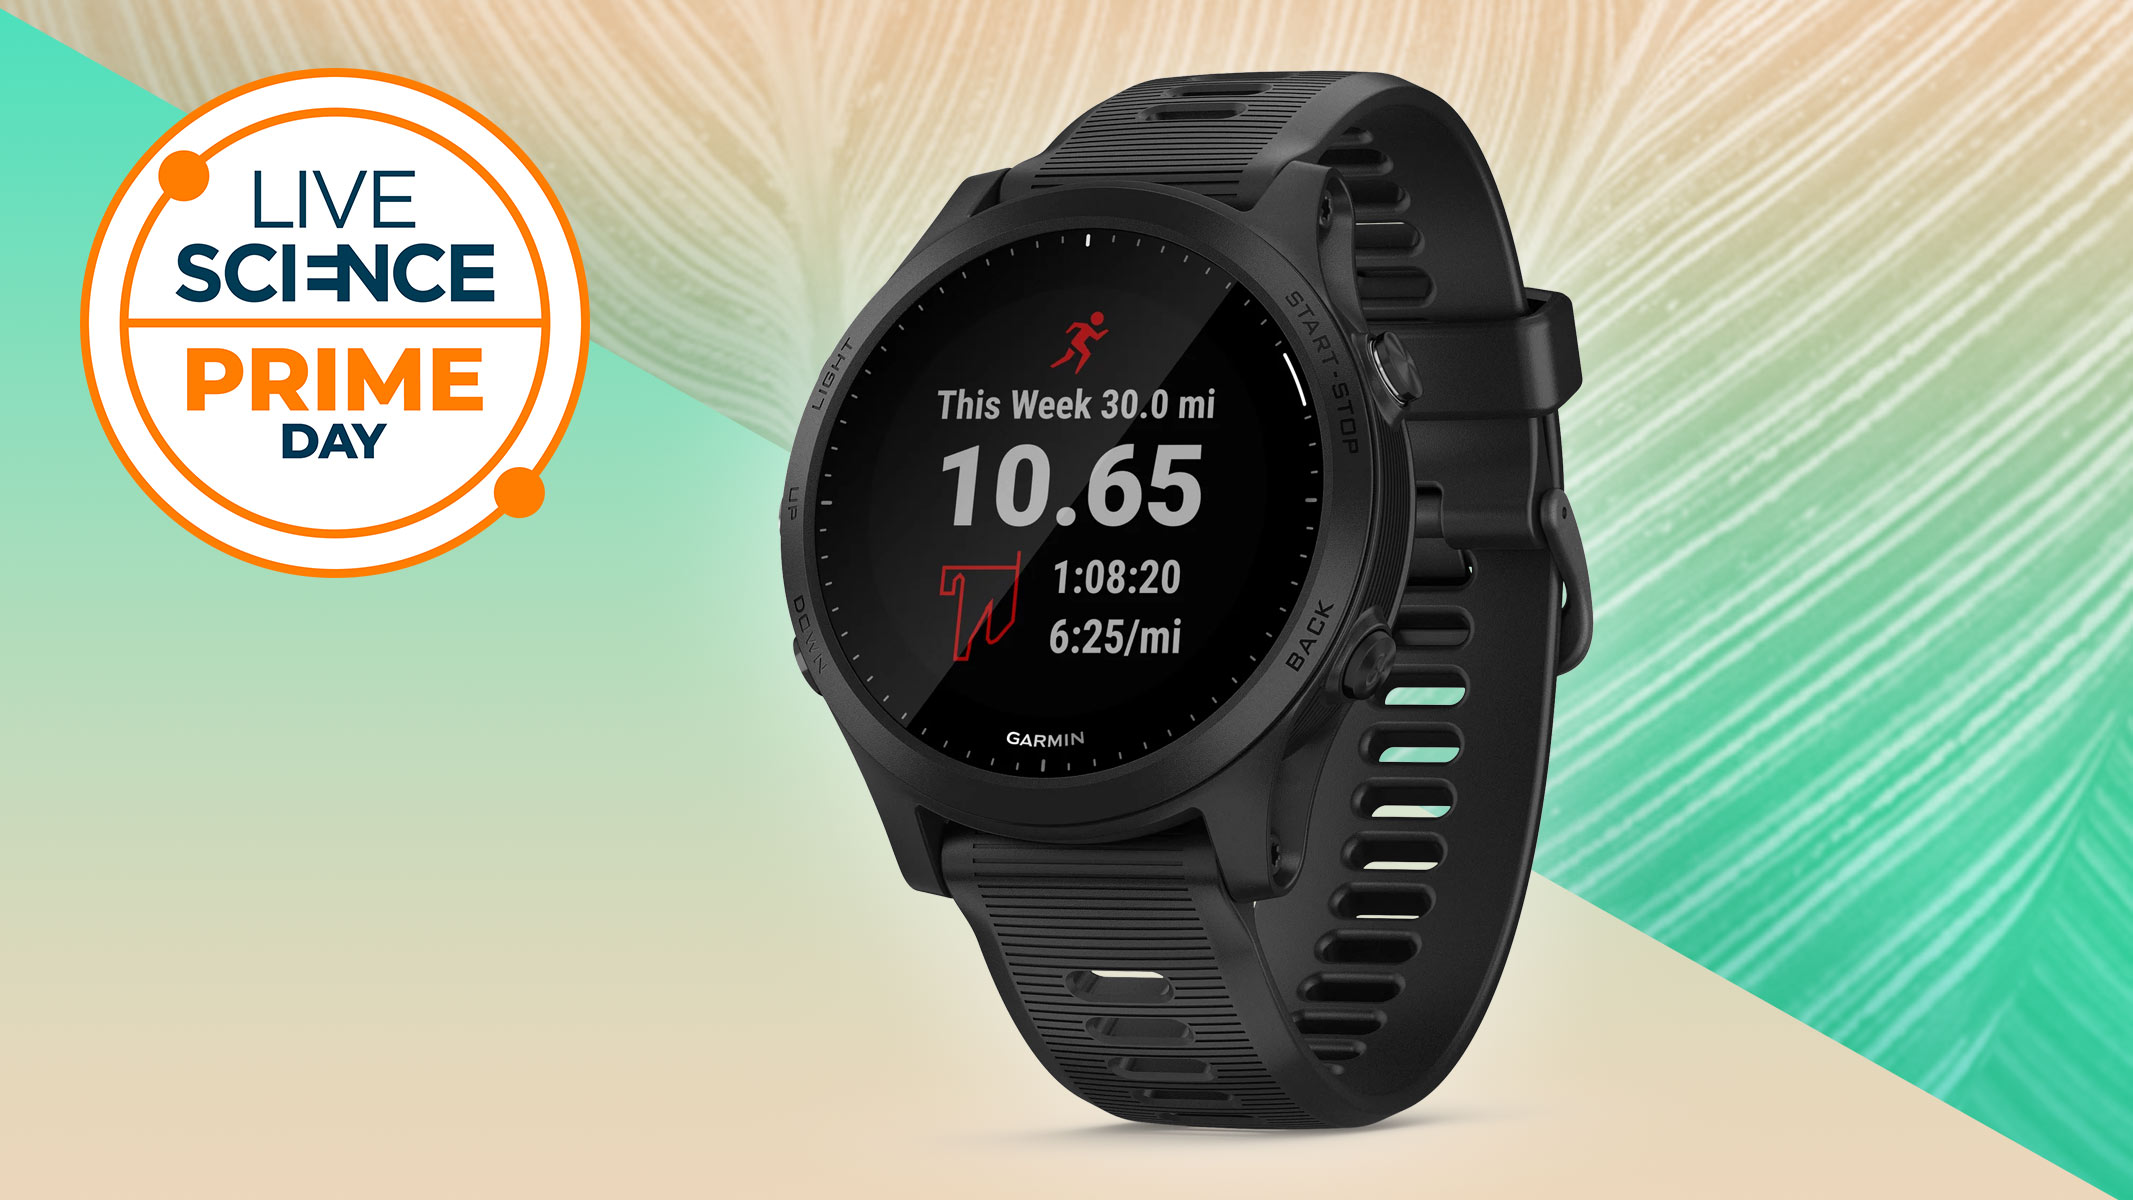  Save more than 50% on this Garmin Forerunner 945 Smartwatch 